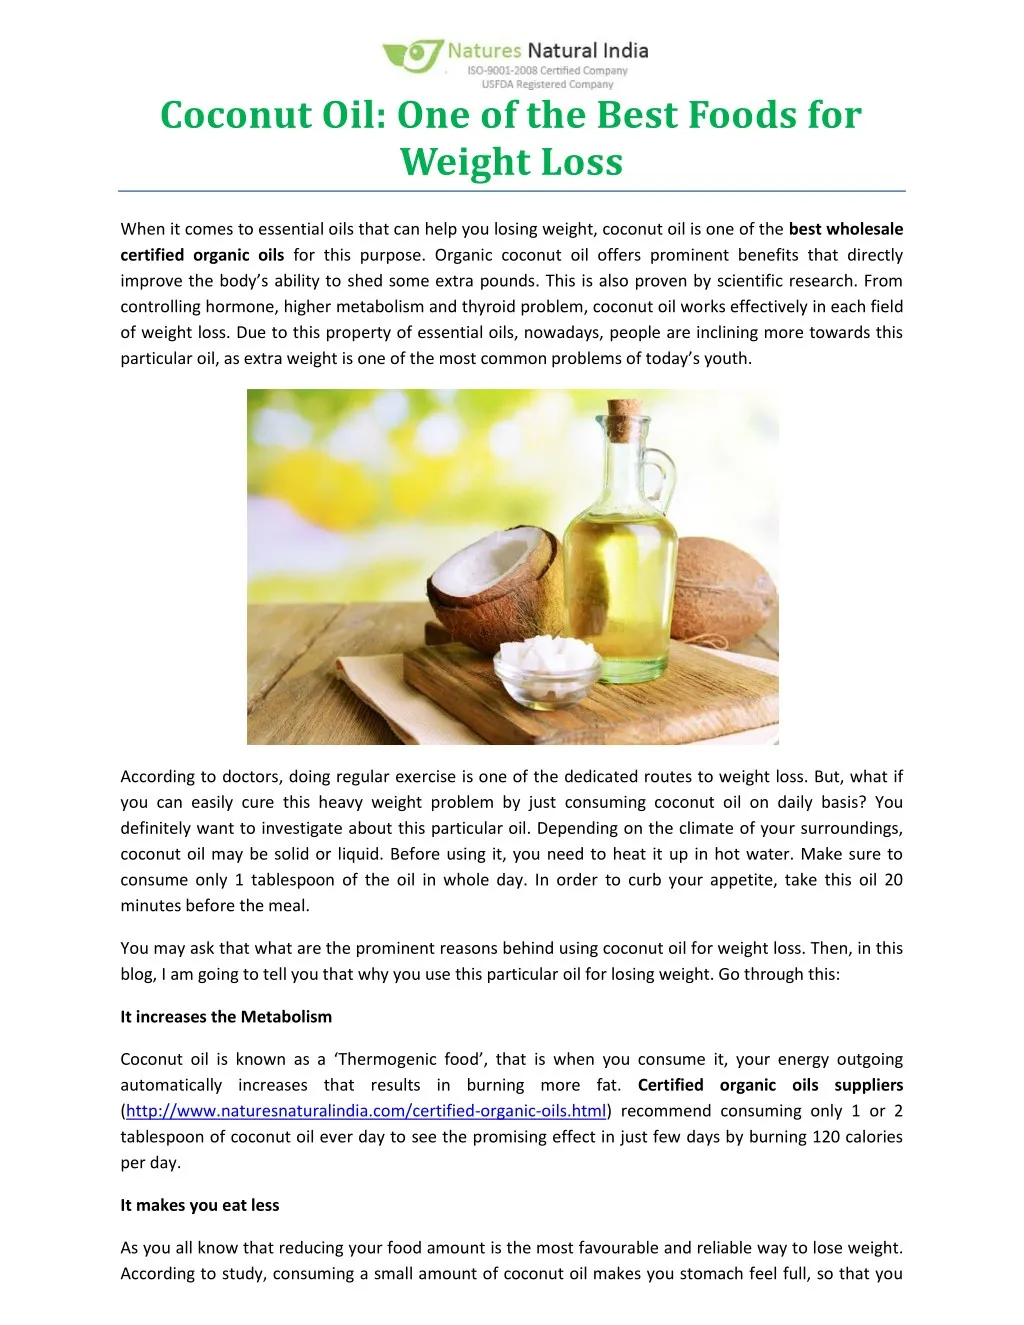 coconut oil one of the best foods for weight loss